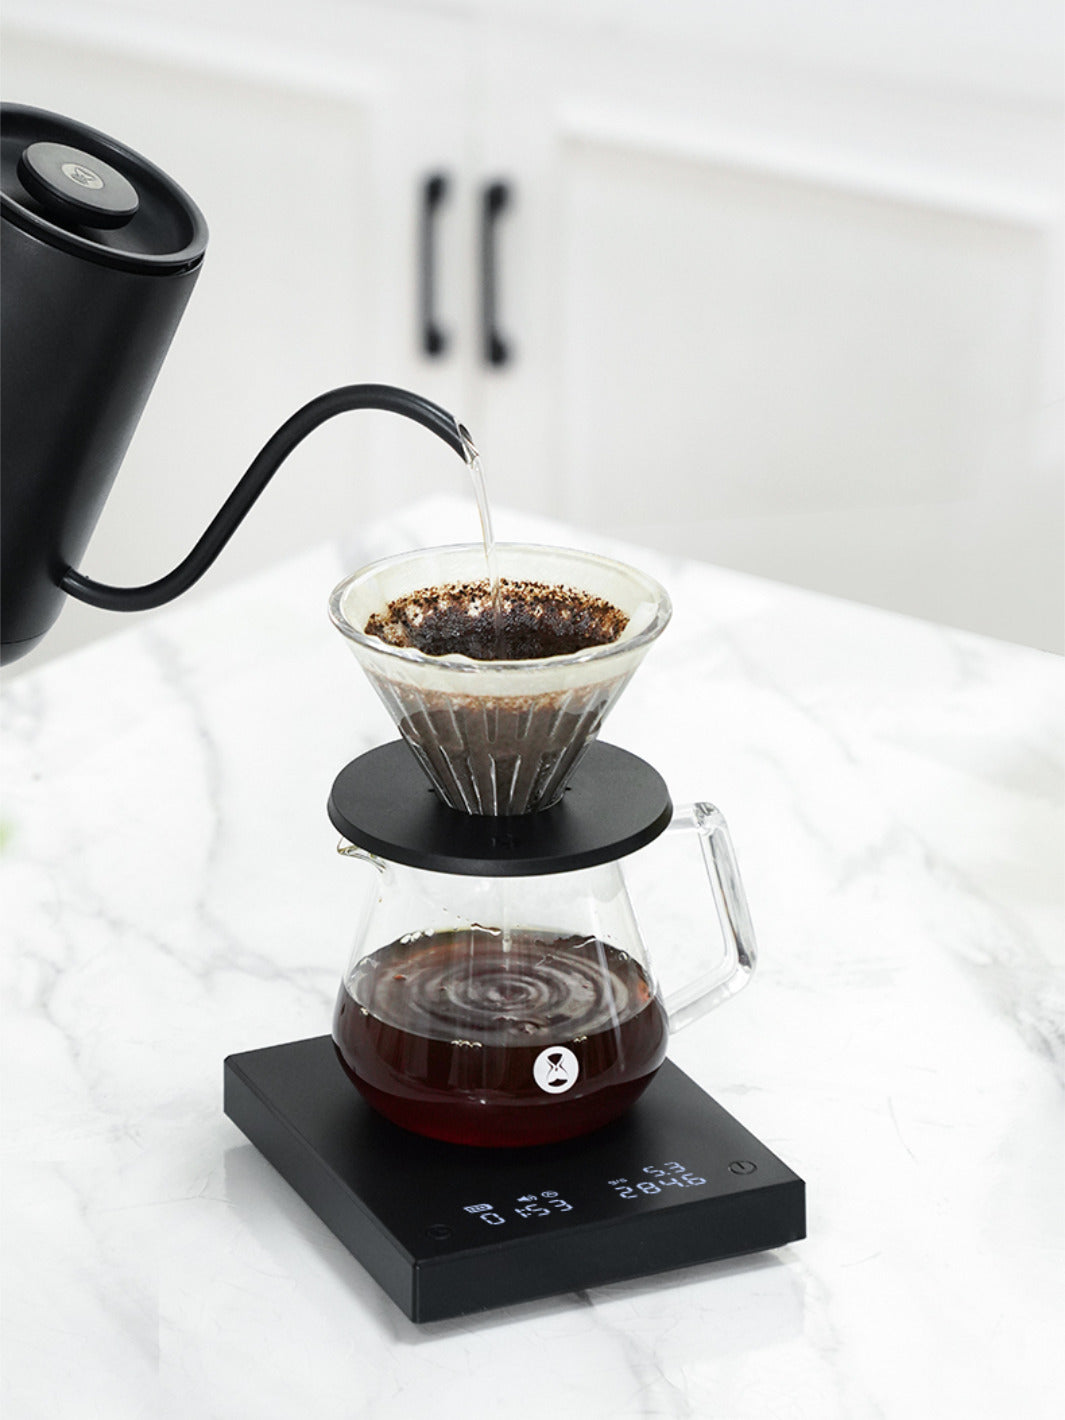 TIMEMORE Basic Plus Black Mirror Pour Over Coffee and Espresso Scale Basic+  Electronic Scale Auto Timer Kitchen scale 0.1g / 2kg